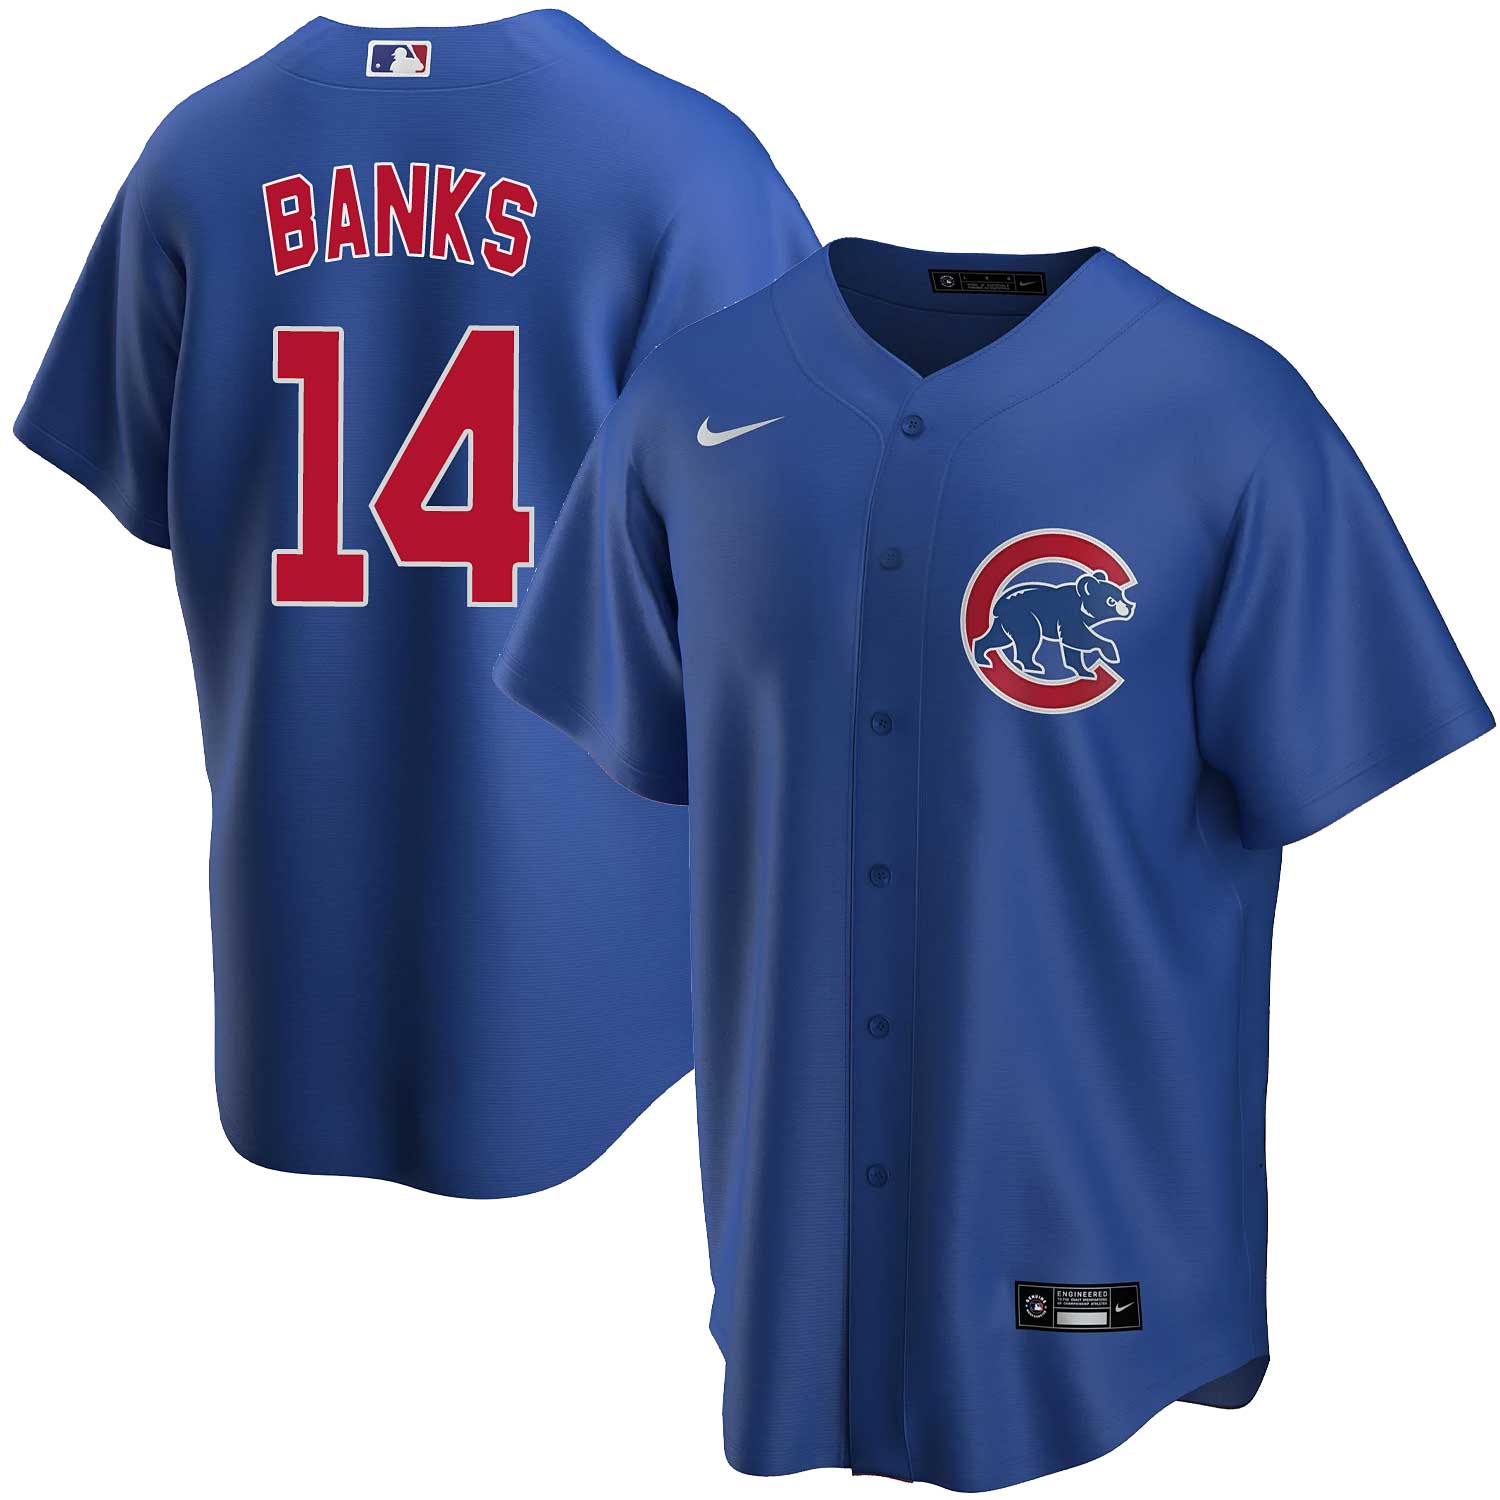 Men's Chicago Cubs Black Limited & Gold Jersey - All Stitched - Nebgift